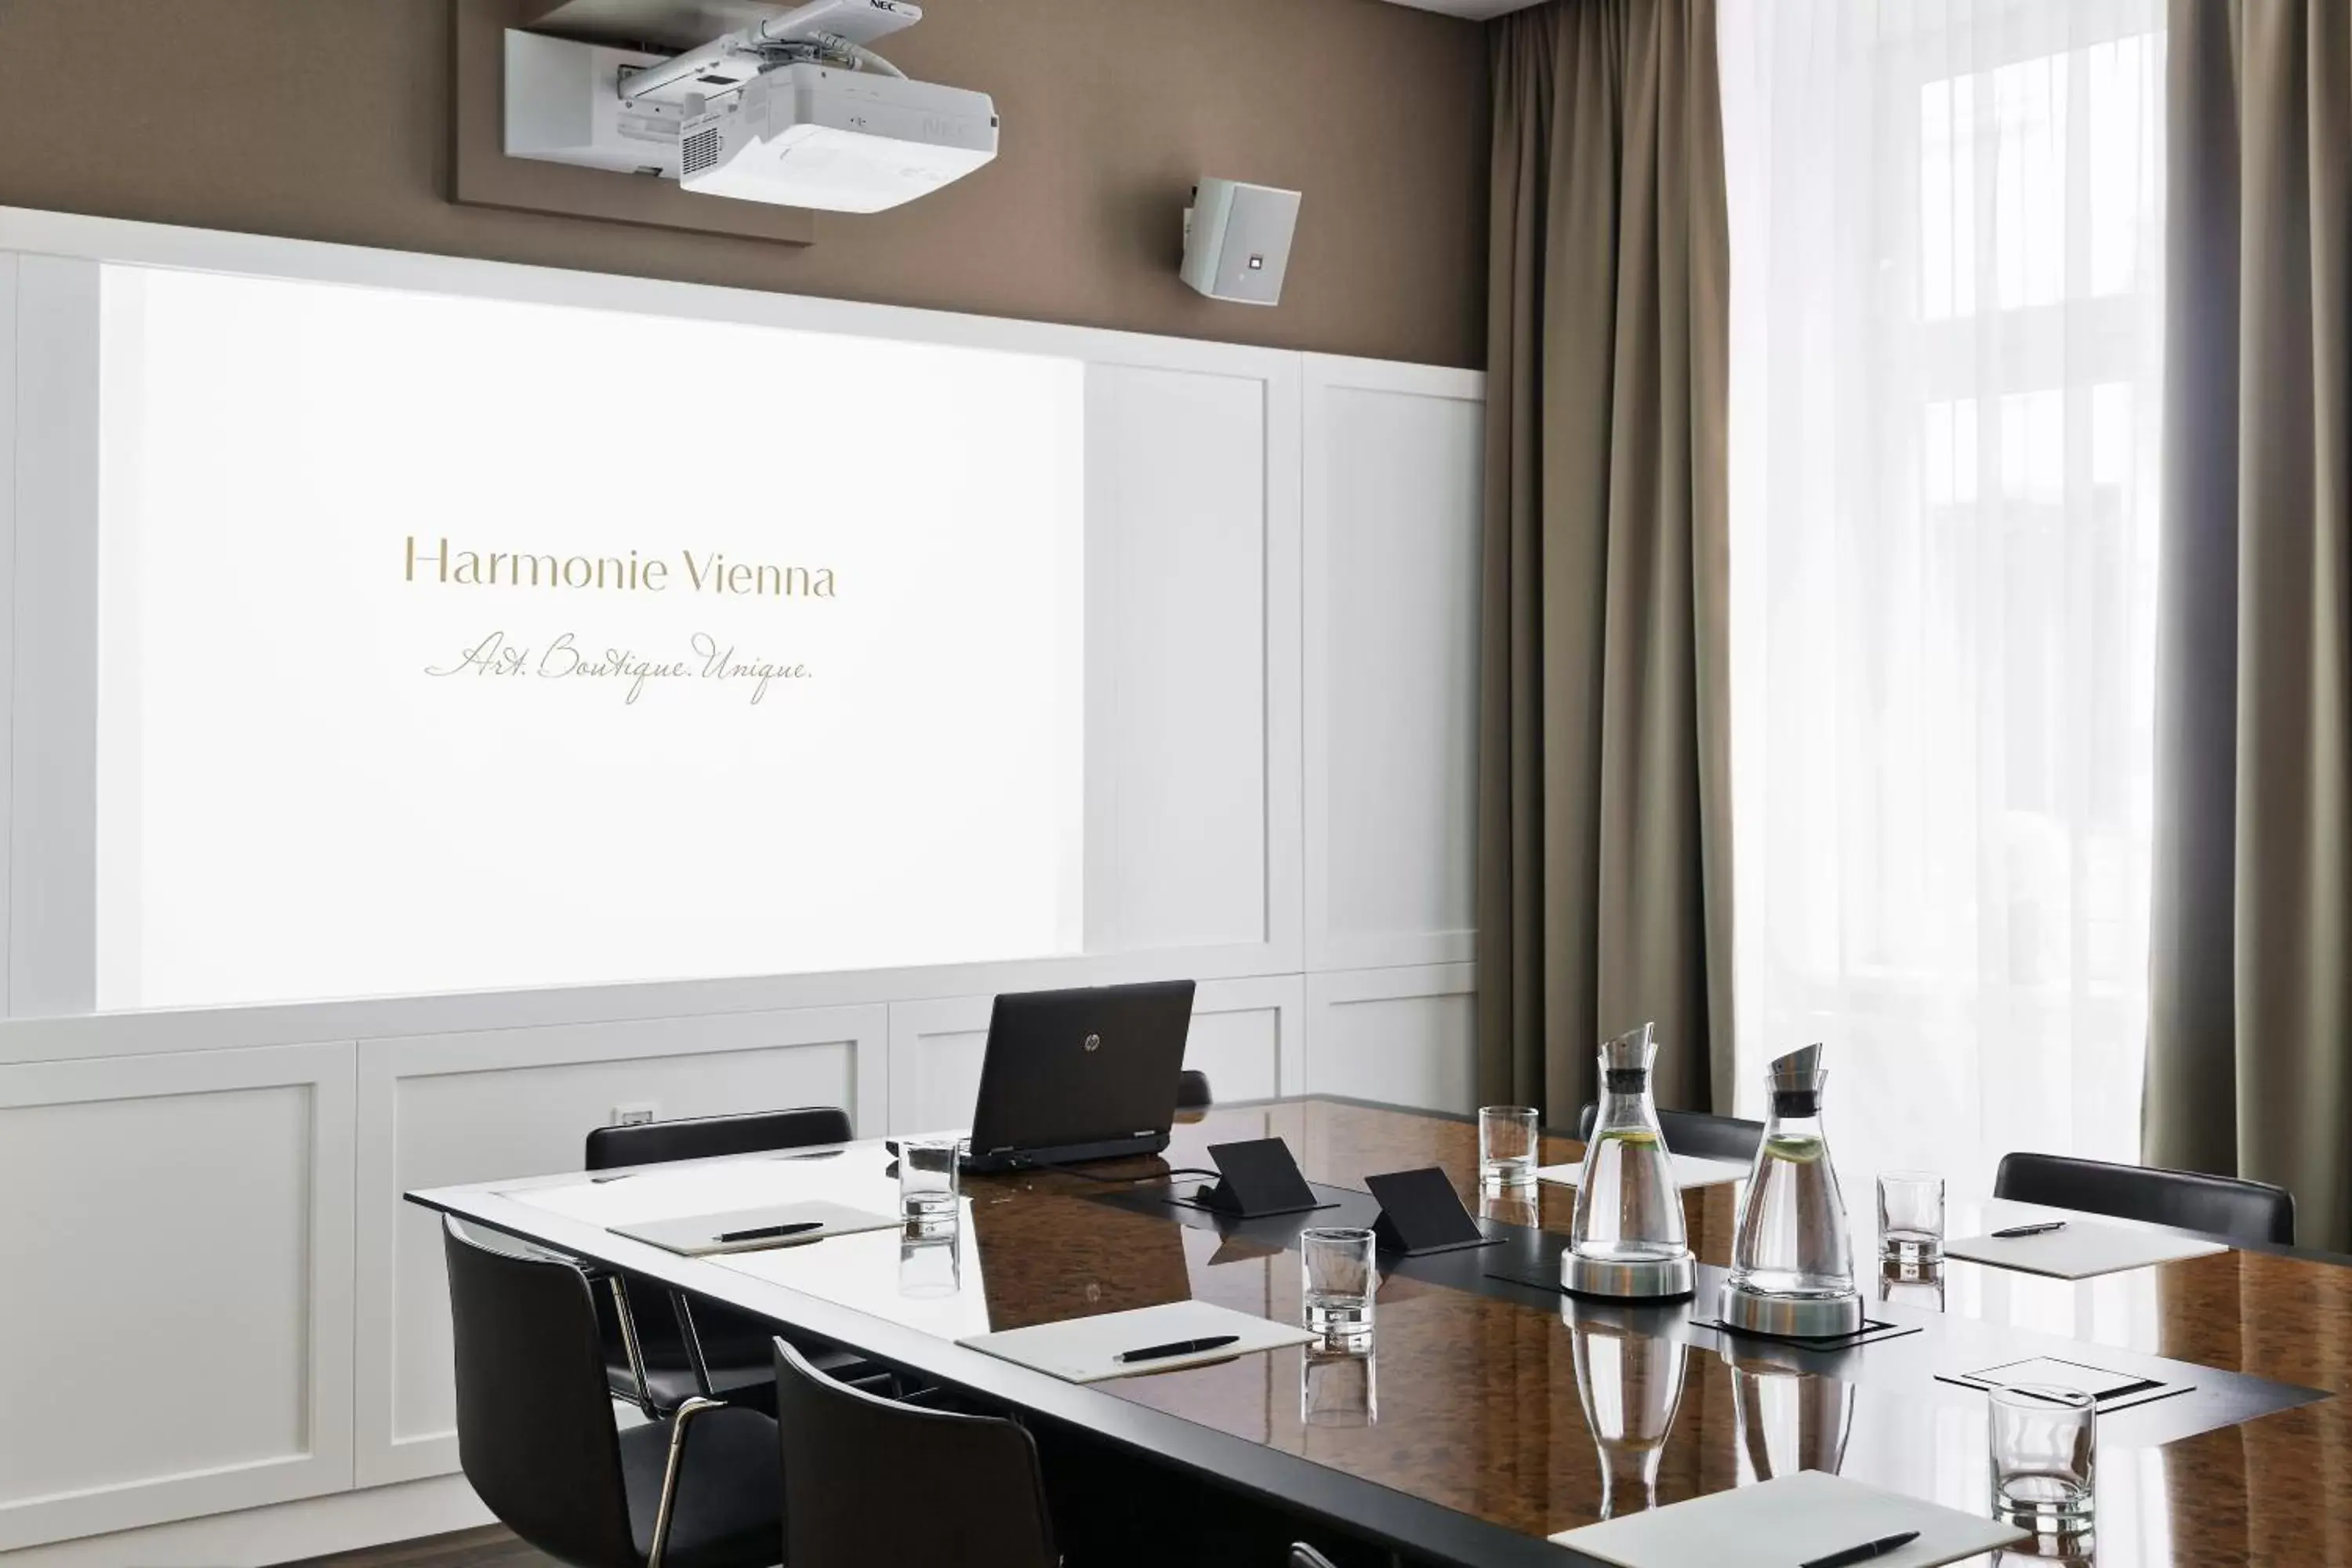 Meeting/conference room in The Harmonie Vienna, BW Premier Collection